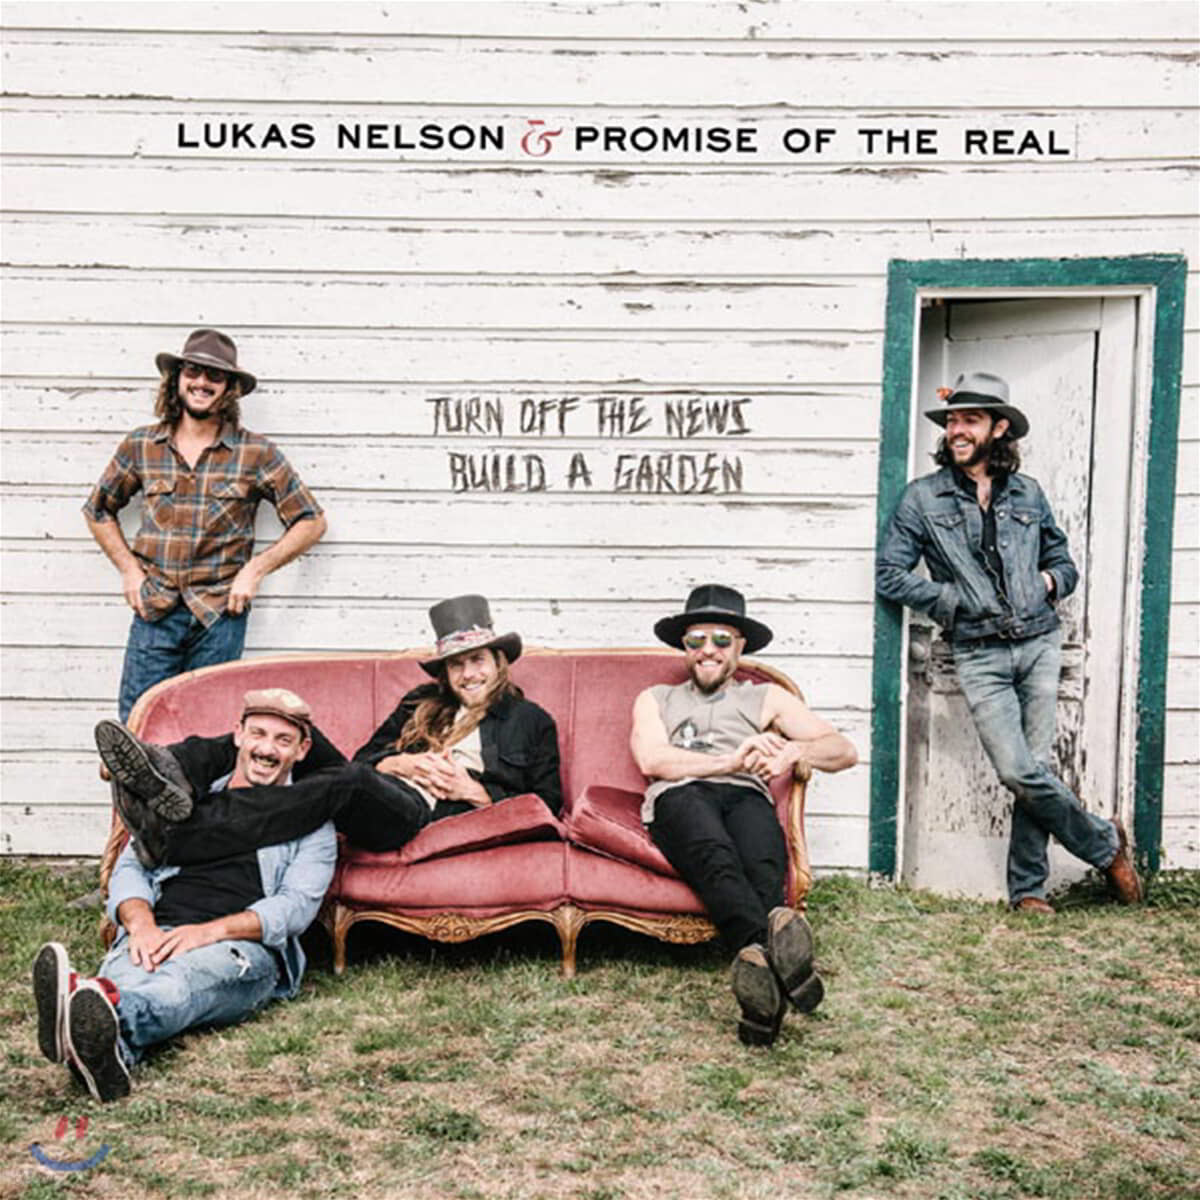 Lukas Nelson / Promise Of The Real - Turn Off The News Build A Garden [LP+7인치 싱글 Vinyl]